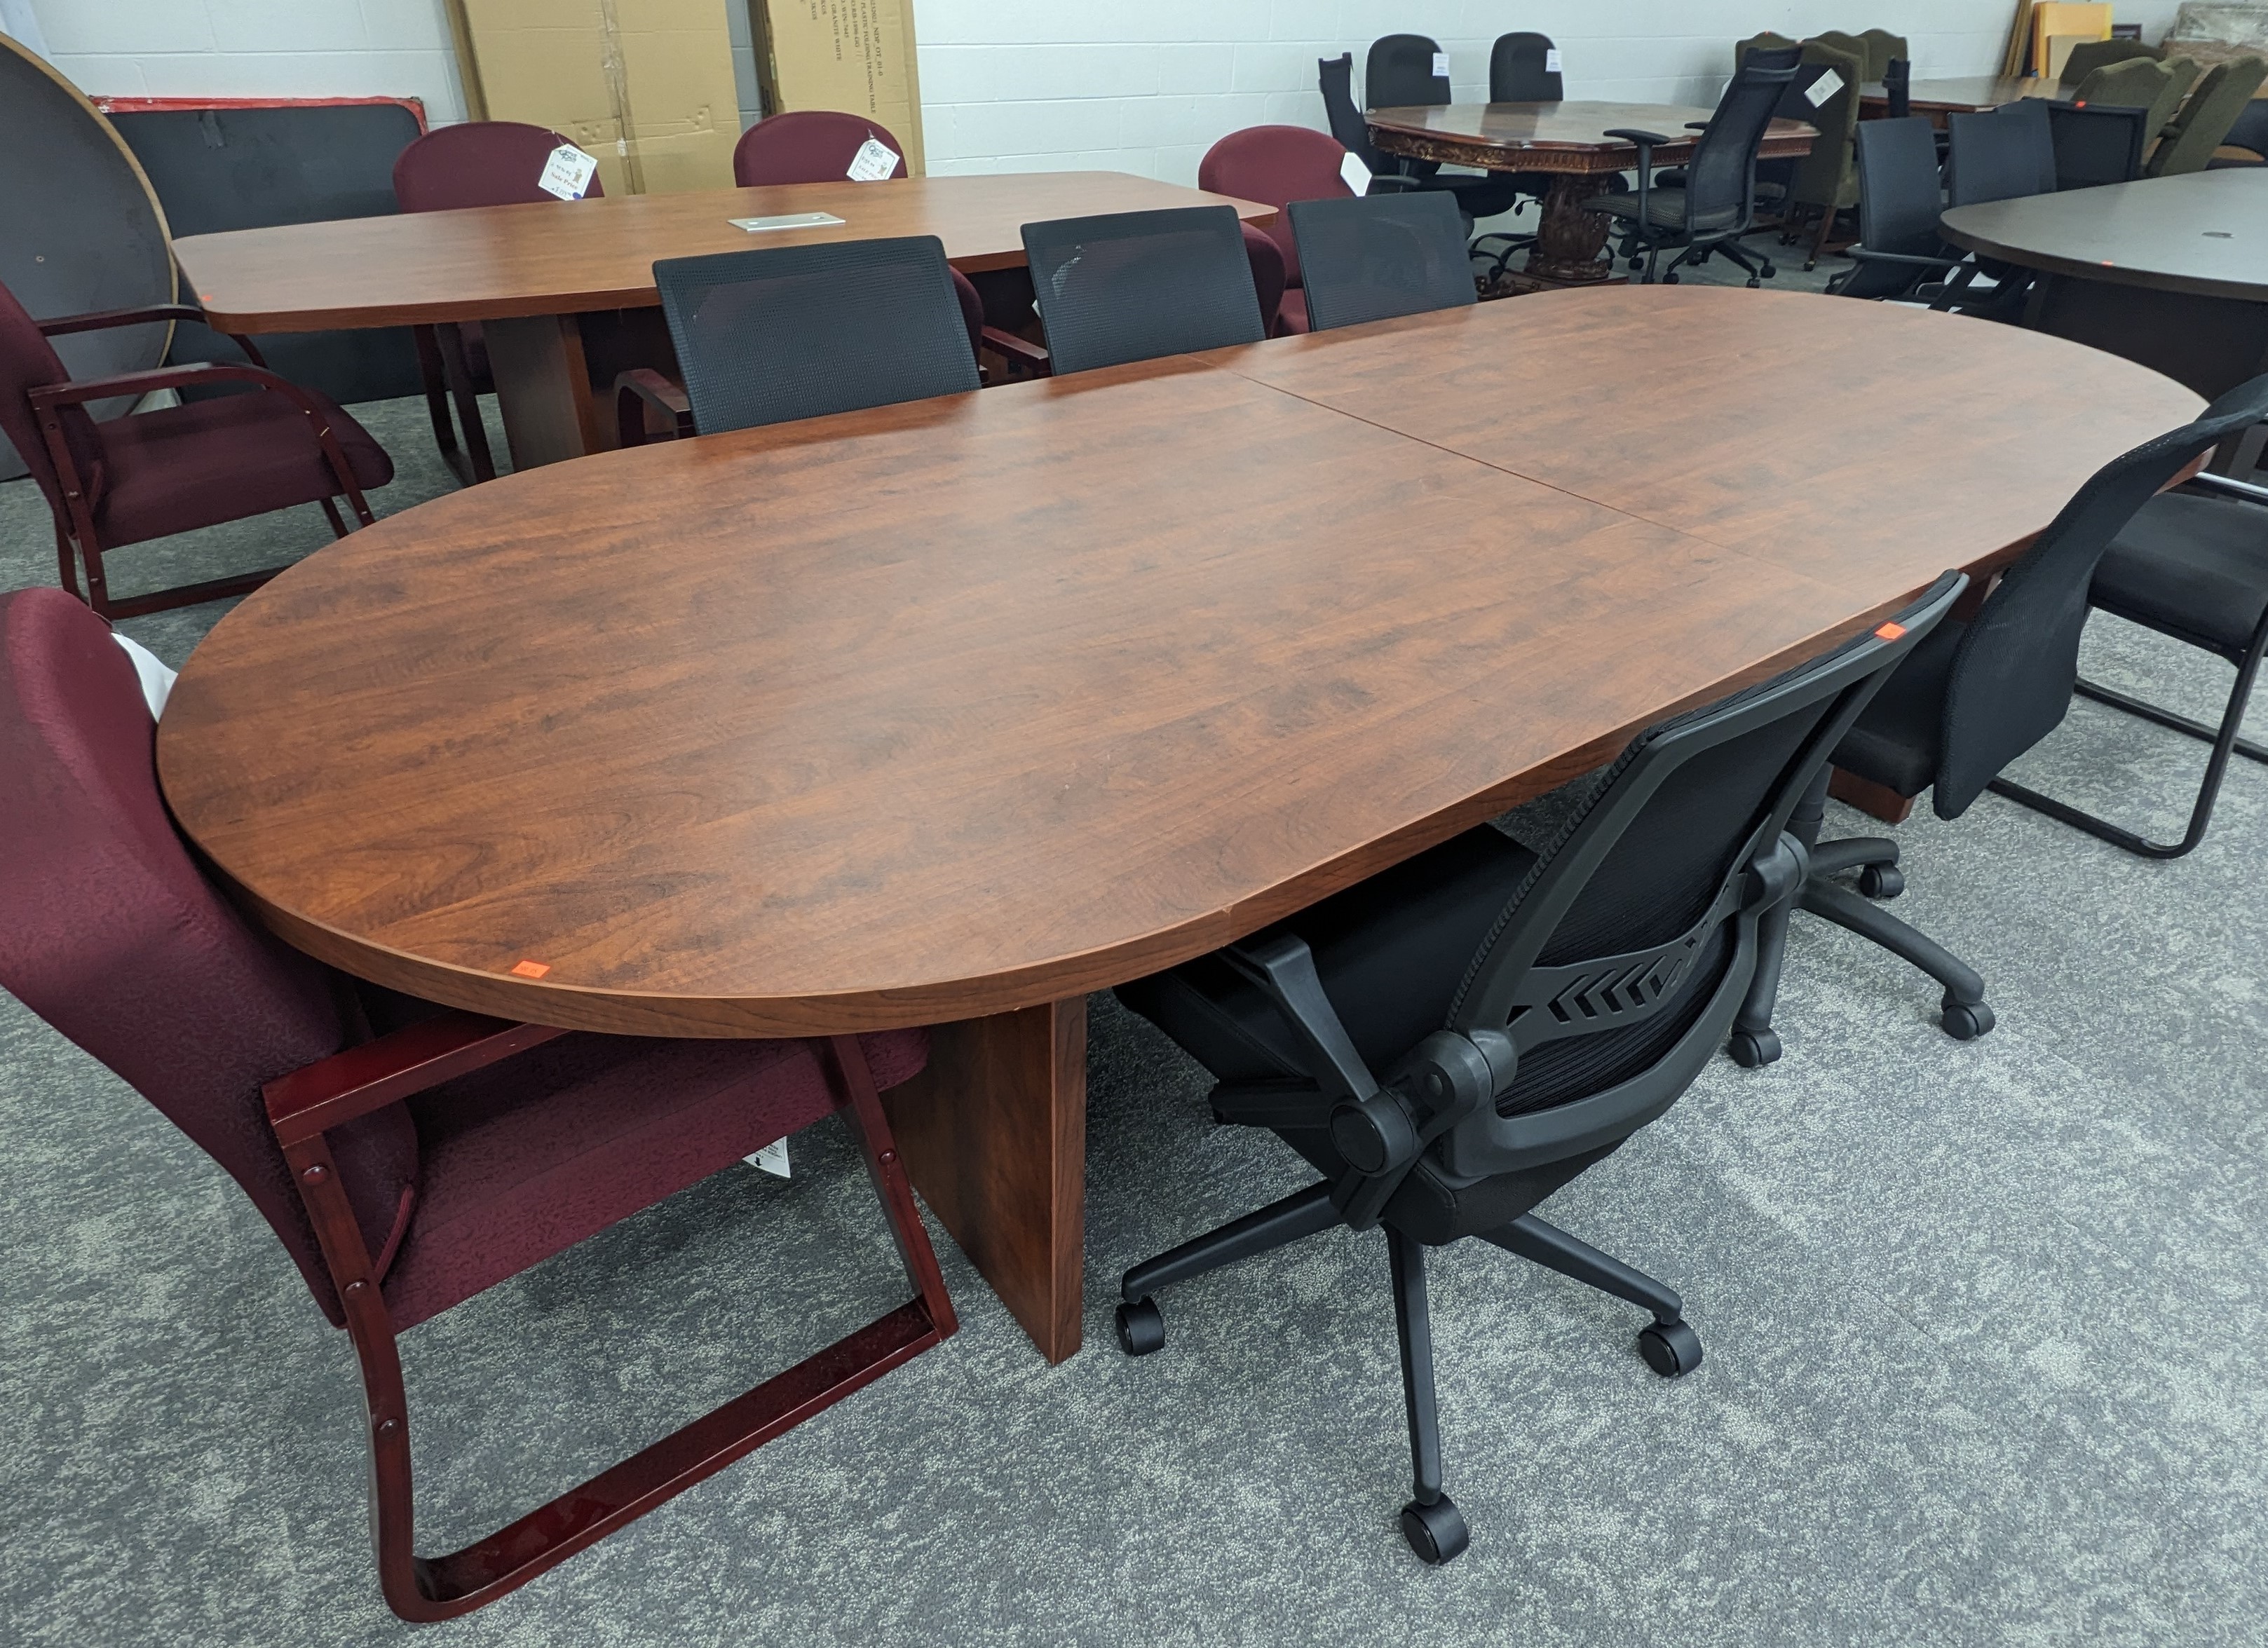 Used 10' Conference Table, chairs sold separately